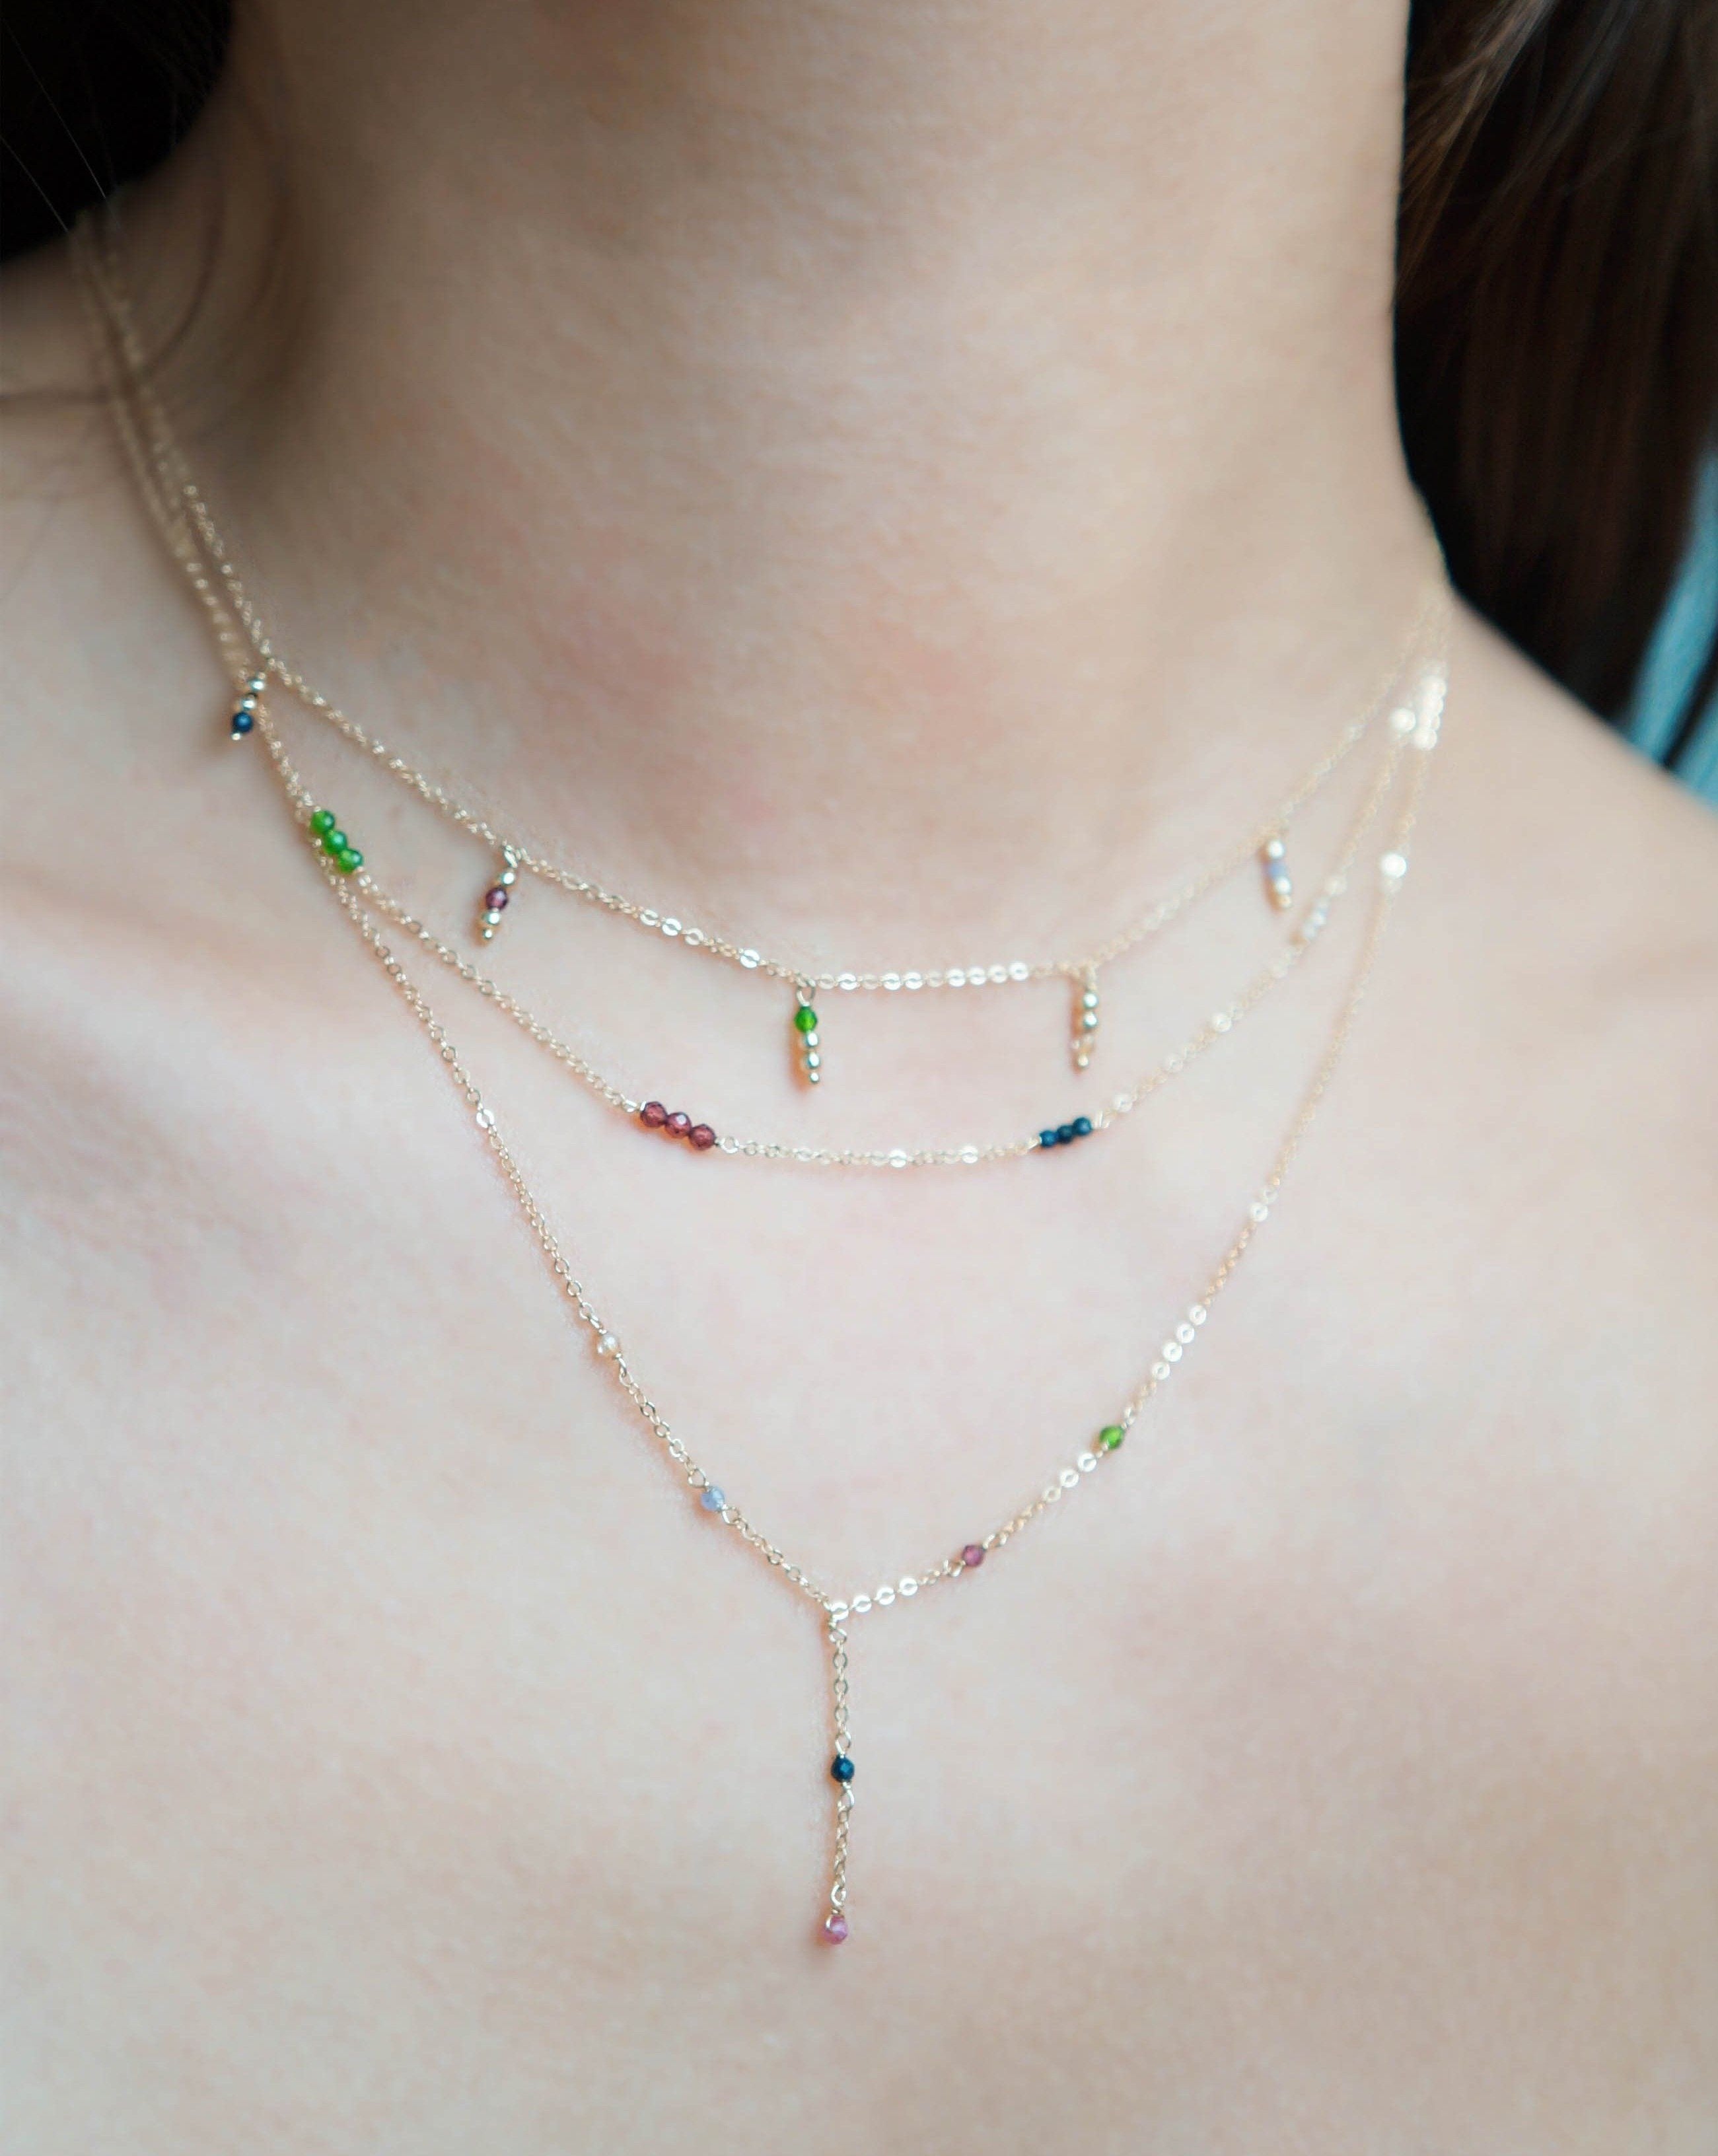 Safron Necklace by KOZAKH. A 16 to 18 inch adjustable length, lariat style necklace, crafted in 14K Gold Filled, featuring 2mm Faceted round Emerald, Garnet, Sapphire, Tourmaline, Tanzanite and Topaz.